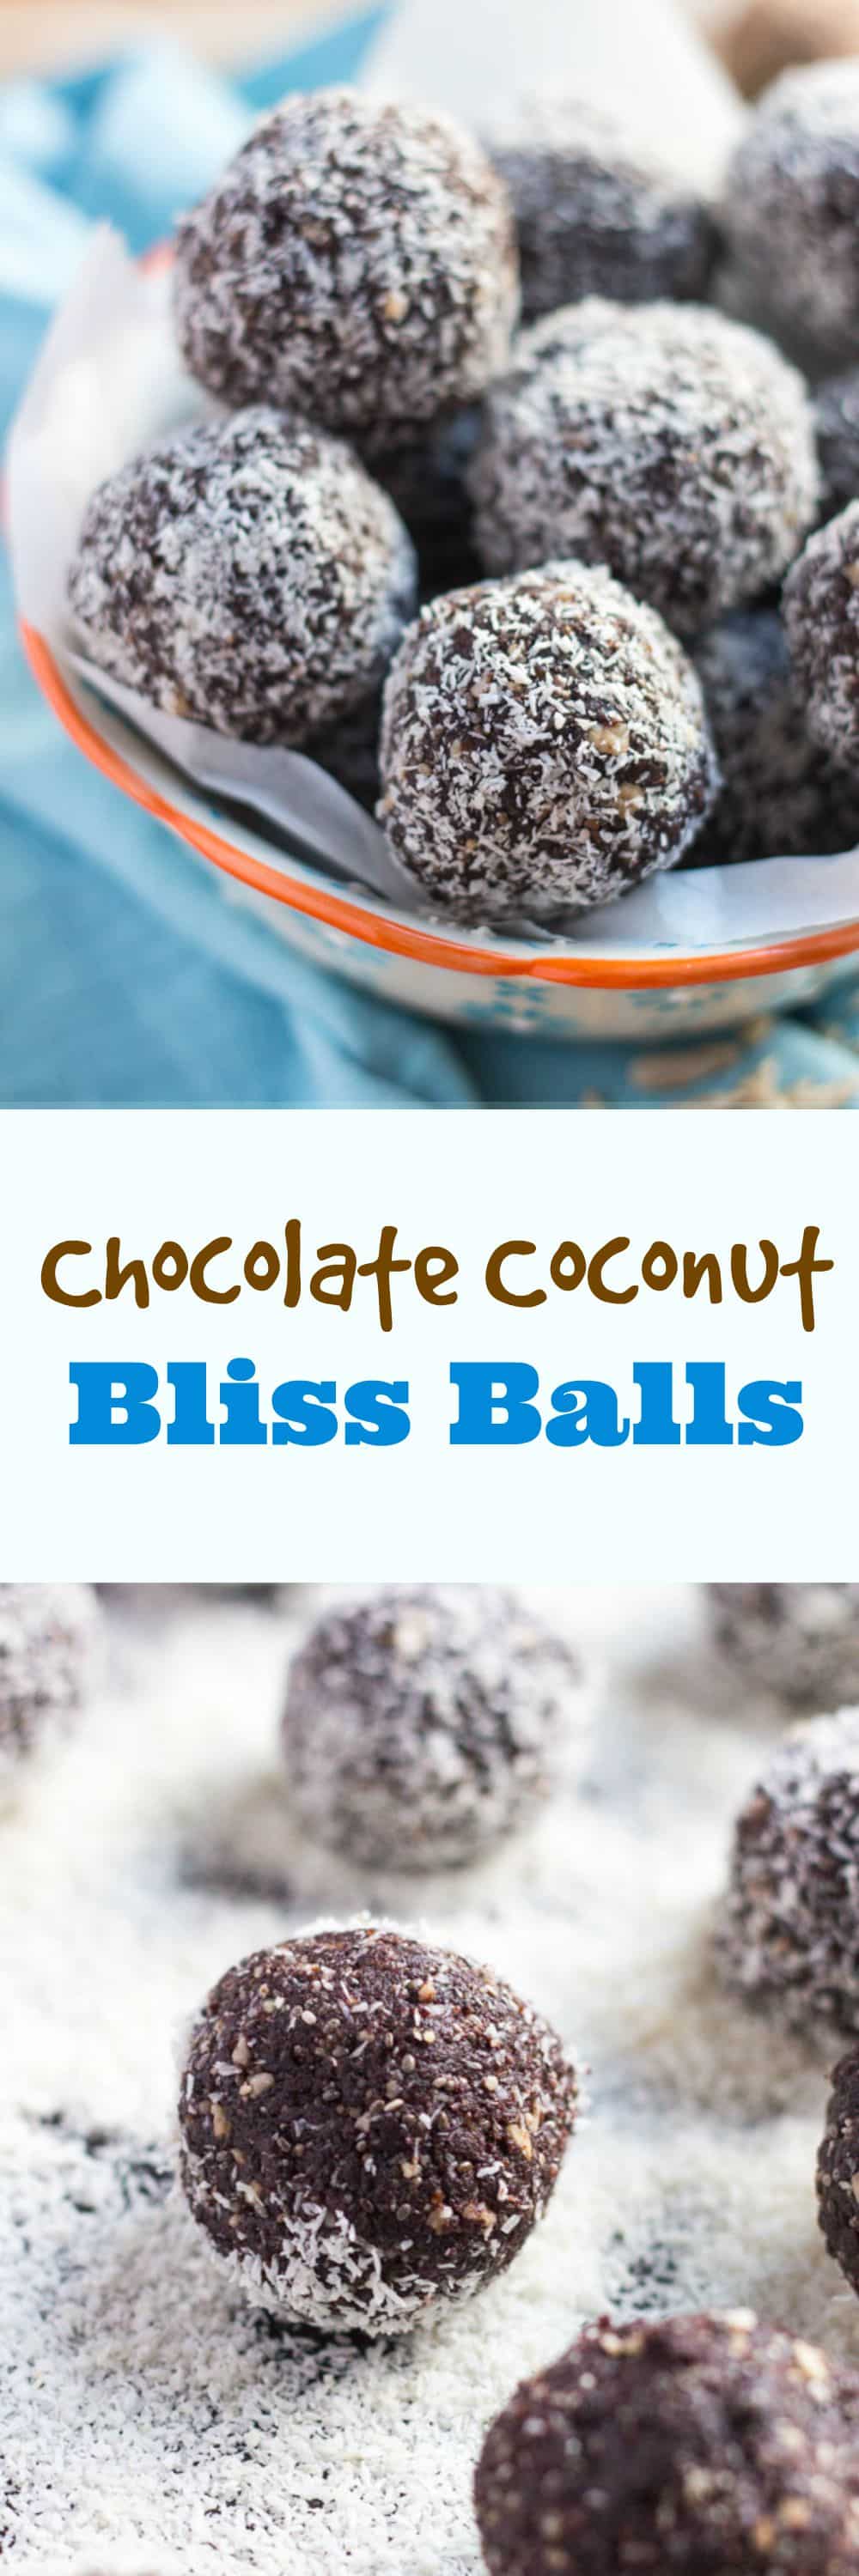 These Chocolate Coconut Bliss Balls are simple to throw together, and great to have in the fridge as a grab-&-go snack.